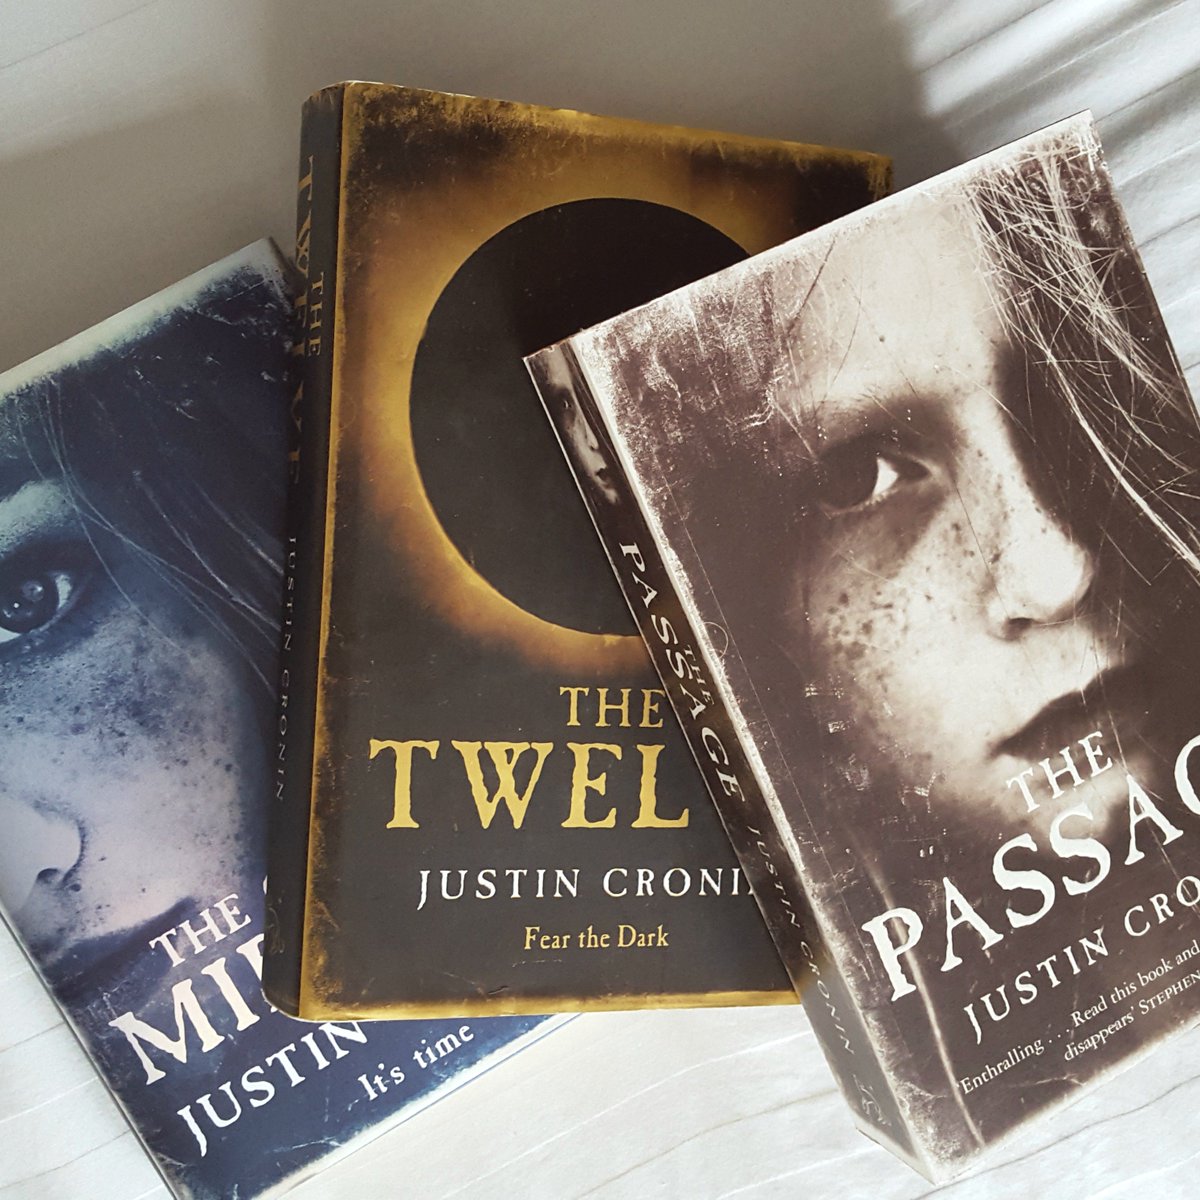 It has pace, it has intrigue, it has the supernatural and the damned right scary . . . Mad Mike's Writing Blog: The Twelve, book review. (Justin Cronin) madmikeswritingblog.blogspot.com/2018/06/the-tw… #amwriting #amreading #bookblogger #booknerd #books #Reading #constantreader #justincronin #ThePassage